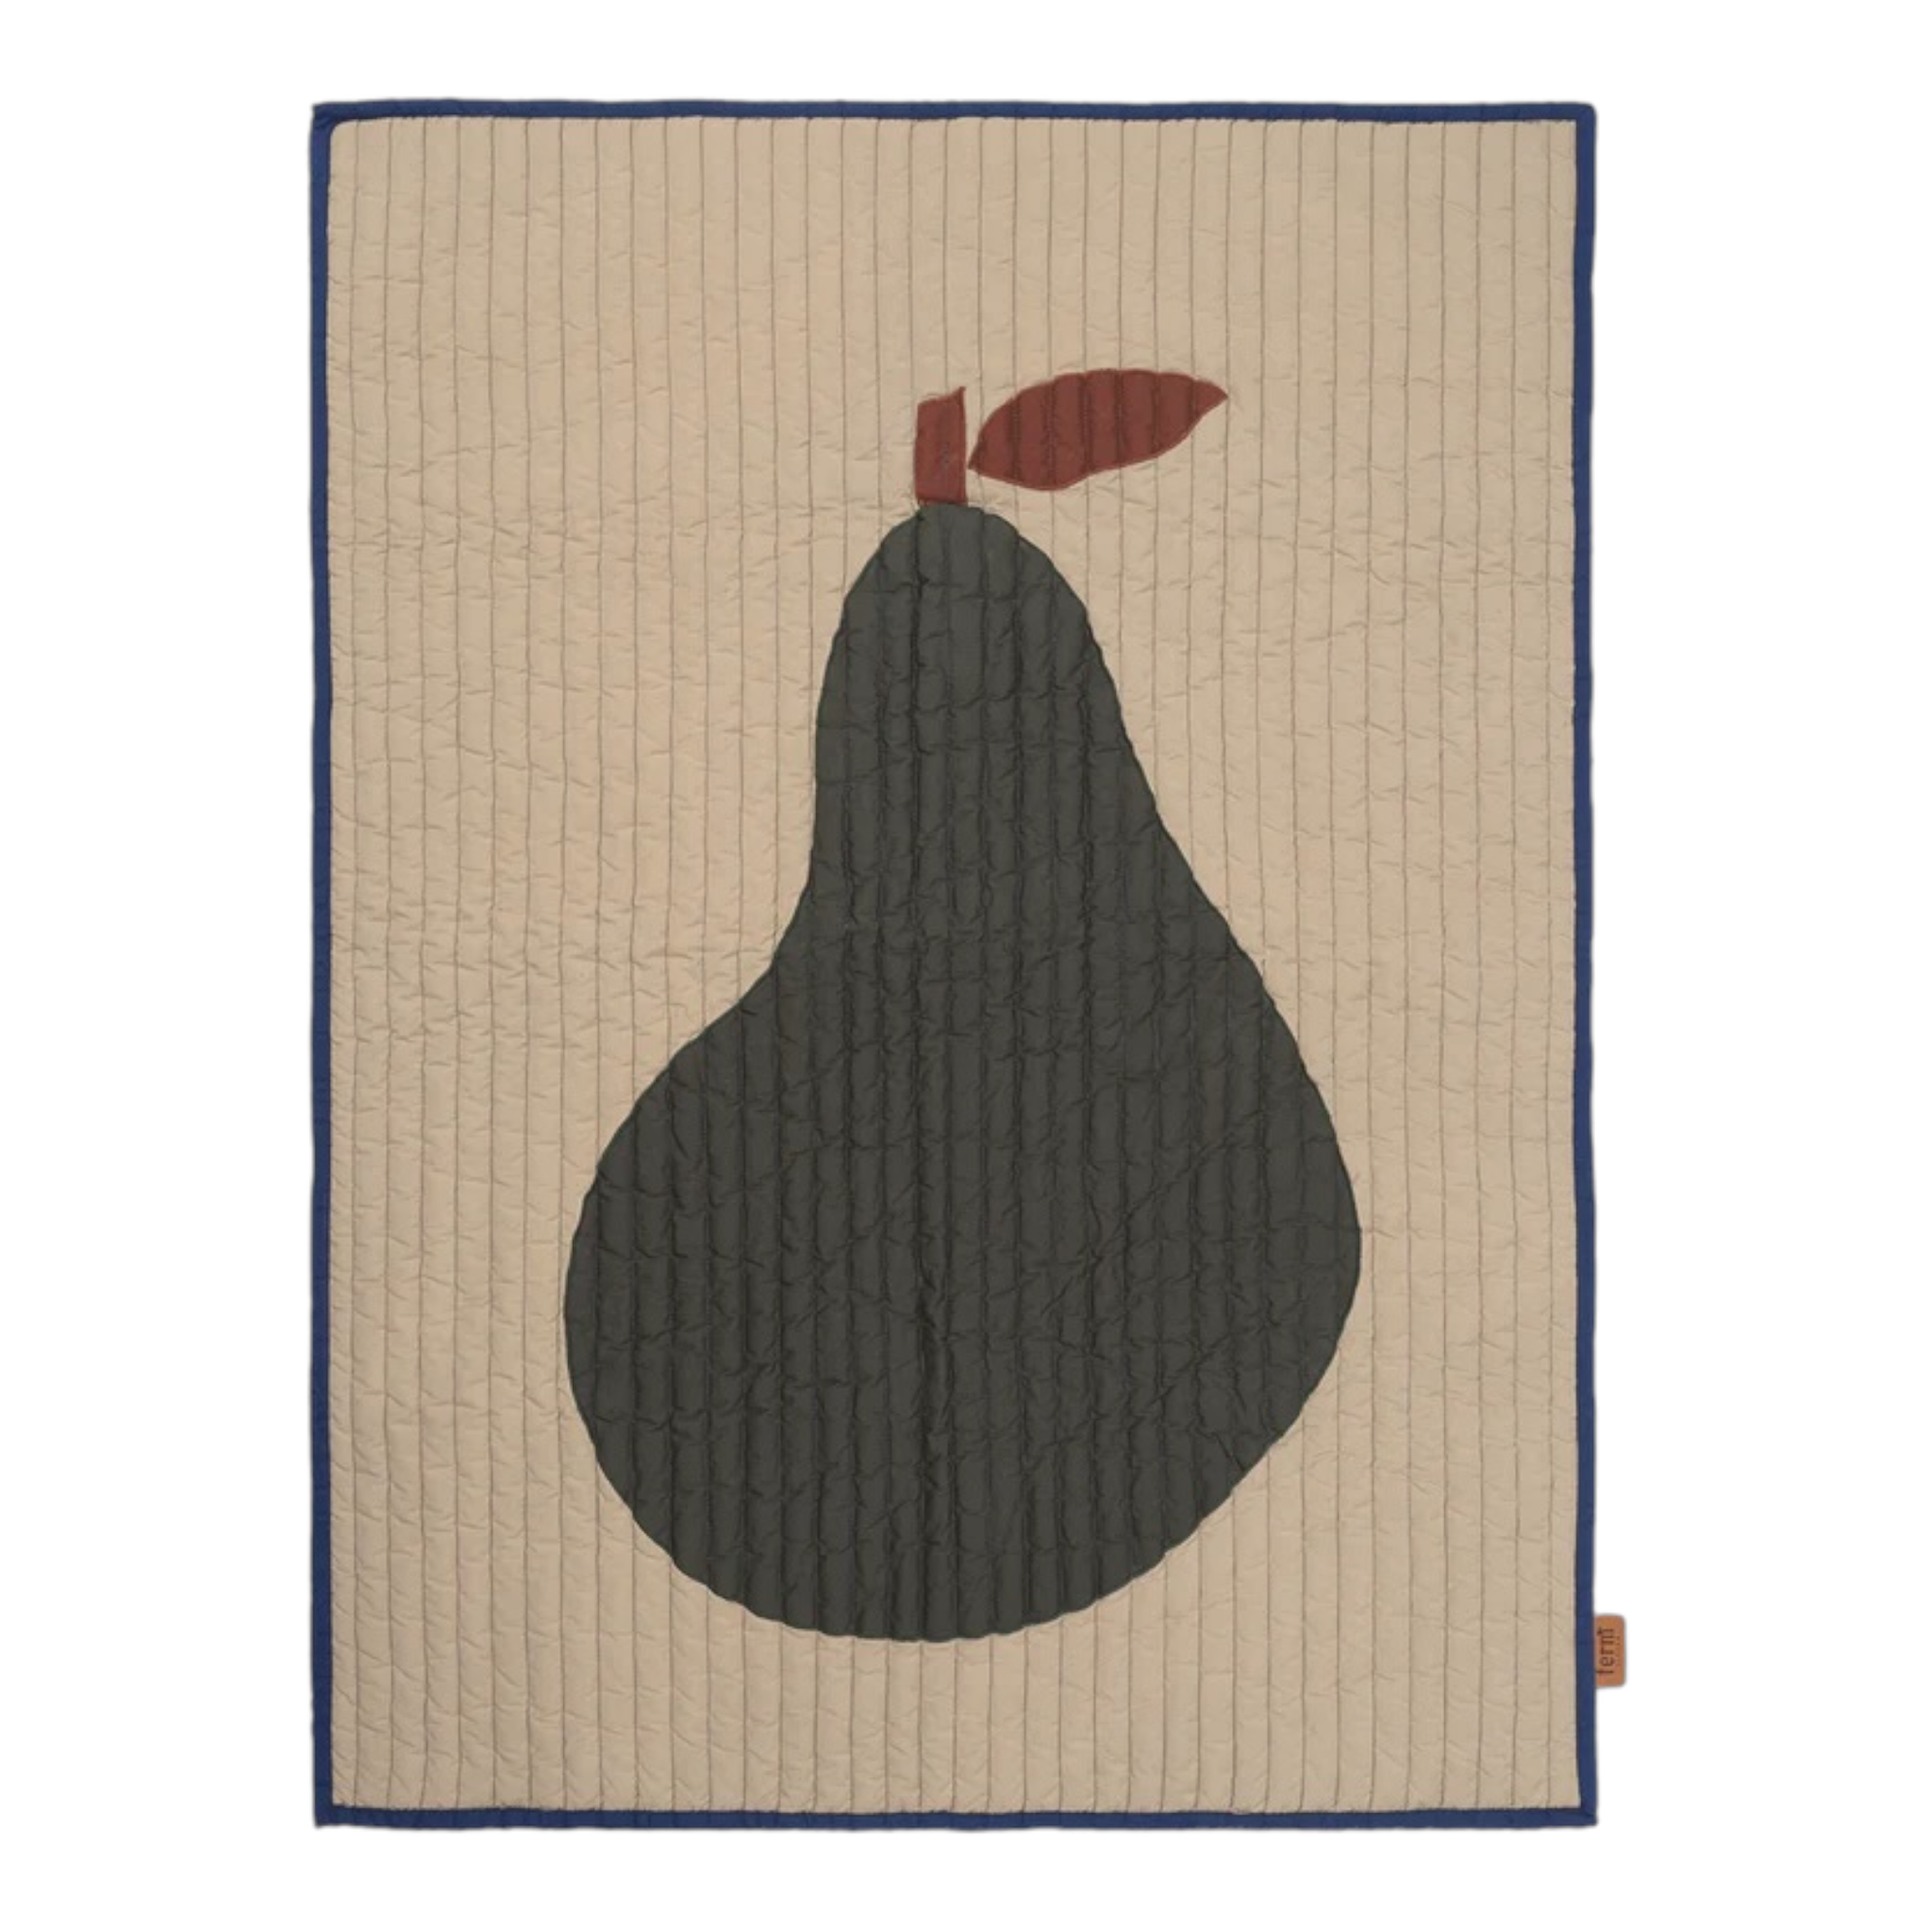 PEAR QUILTED BLANKET Club Palma 